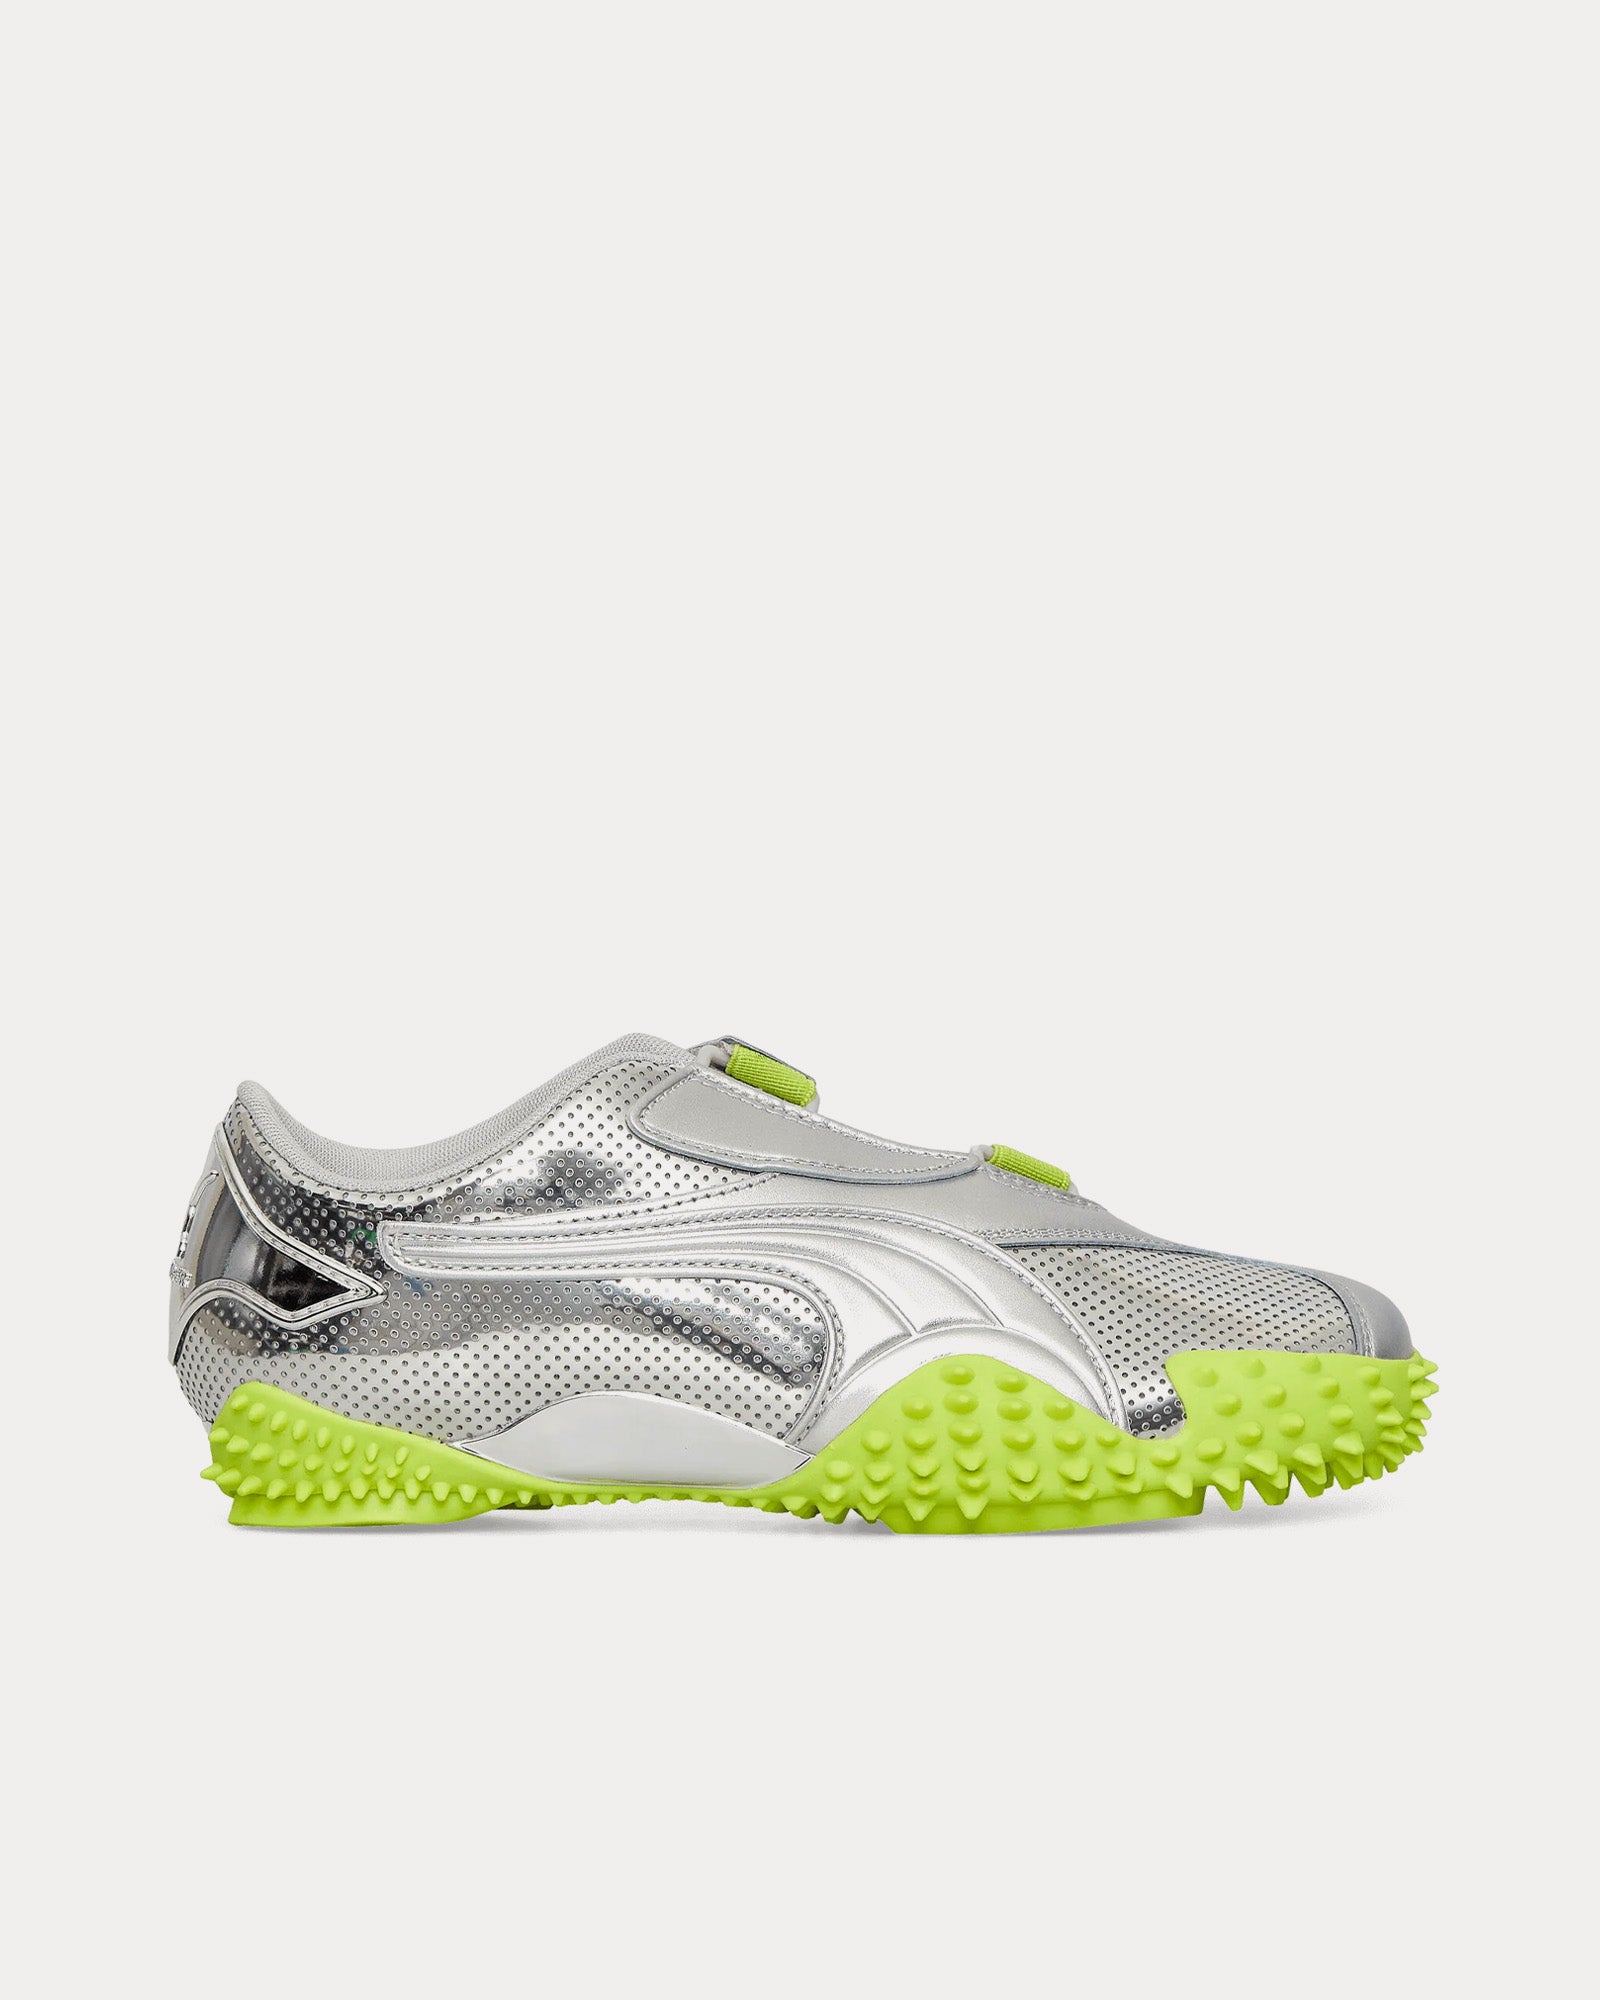 Puma x Ottolinger - Mostro Silver / Lime Slip On Sneakers